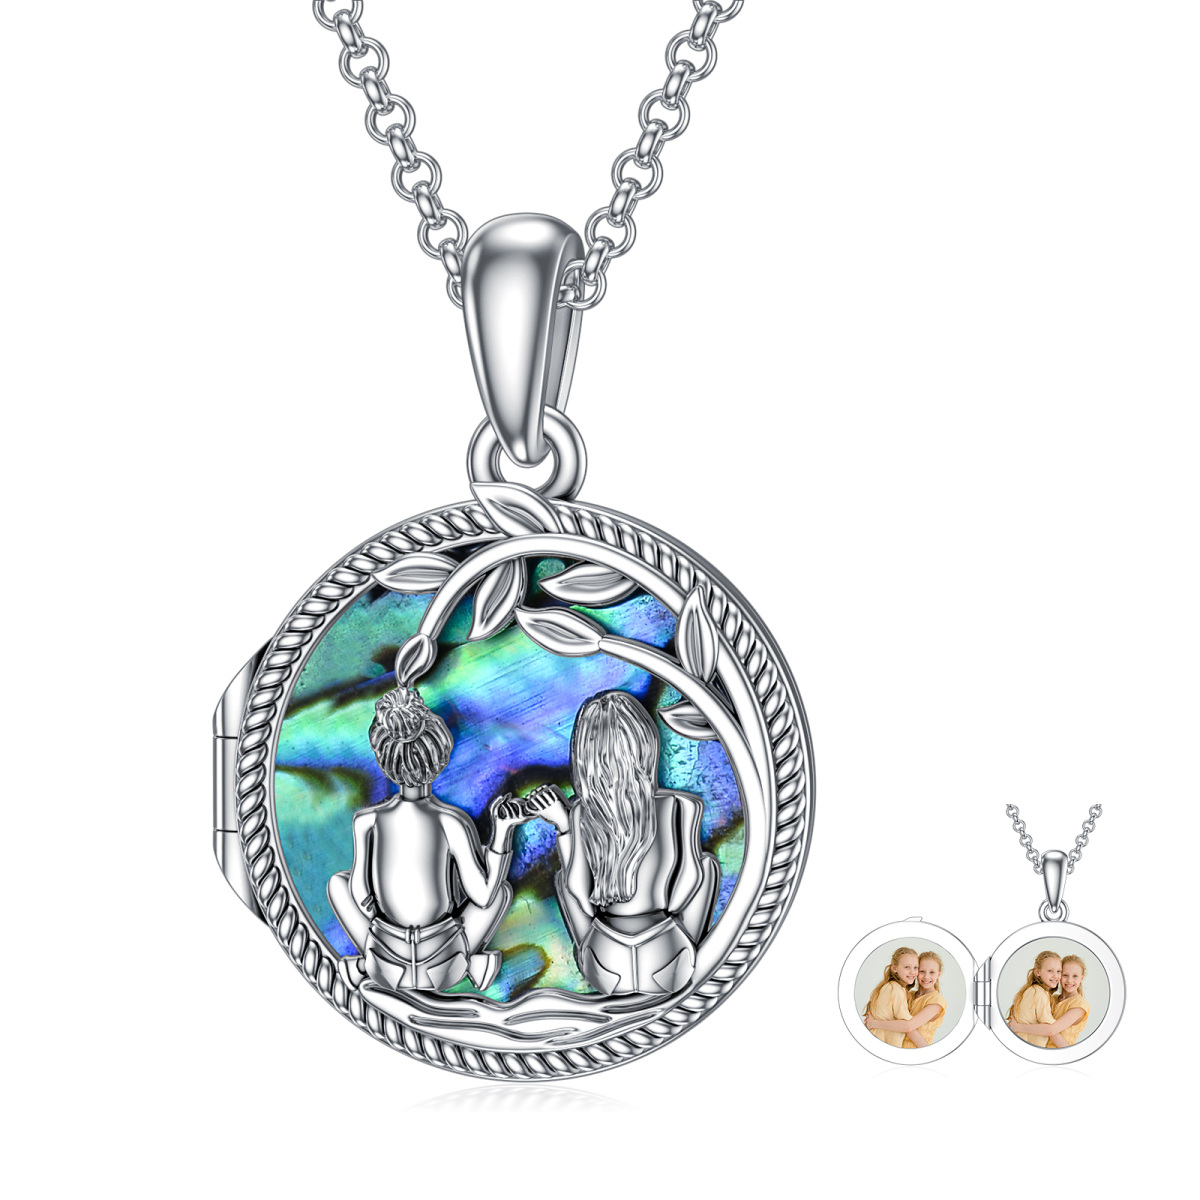 Sterling Silver Abalone Shellfish Sisters Personalized Photo Locket Necklace with Engraved Word-1